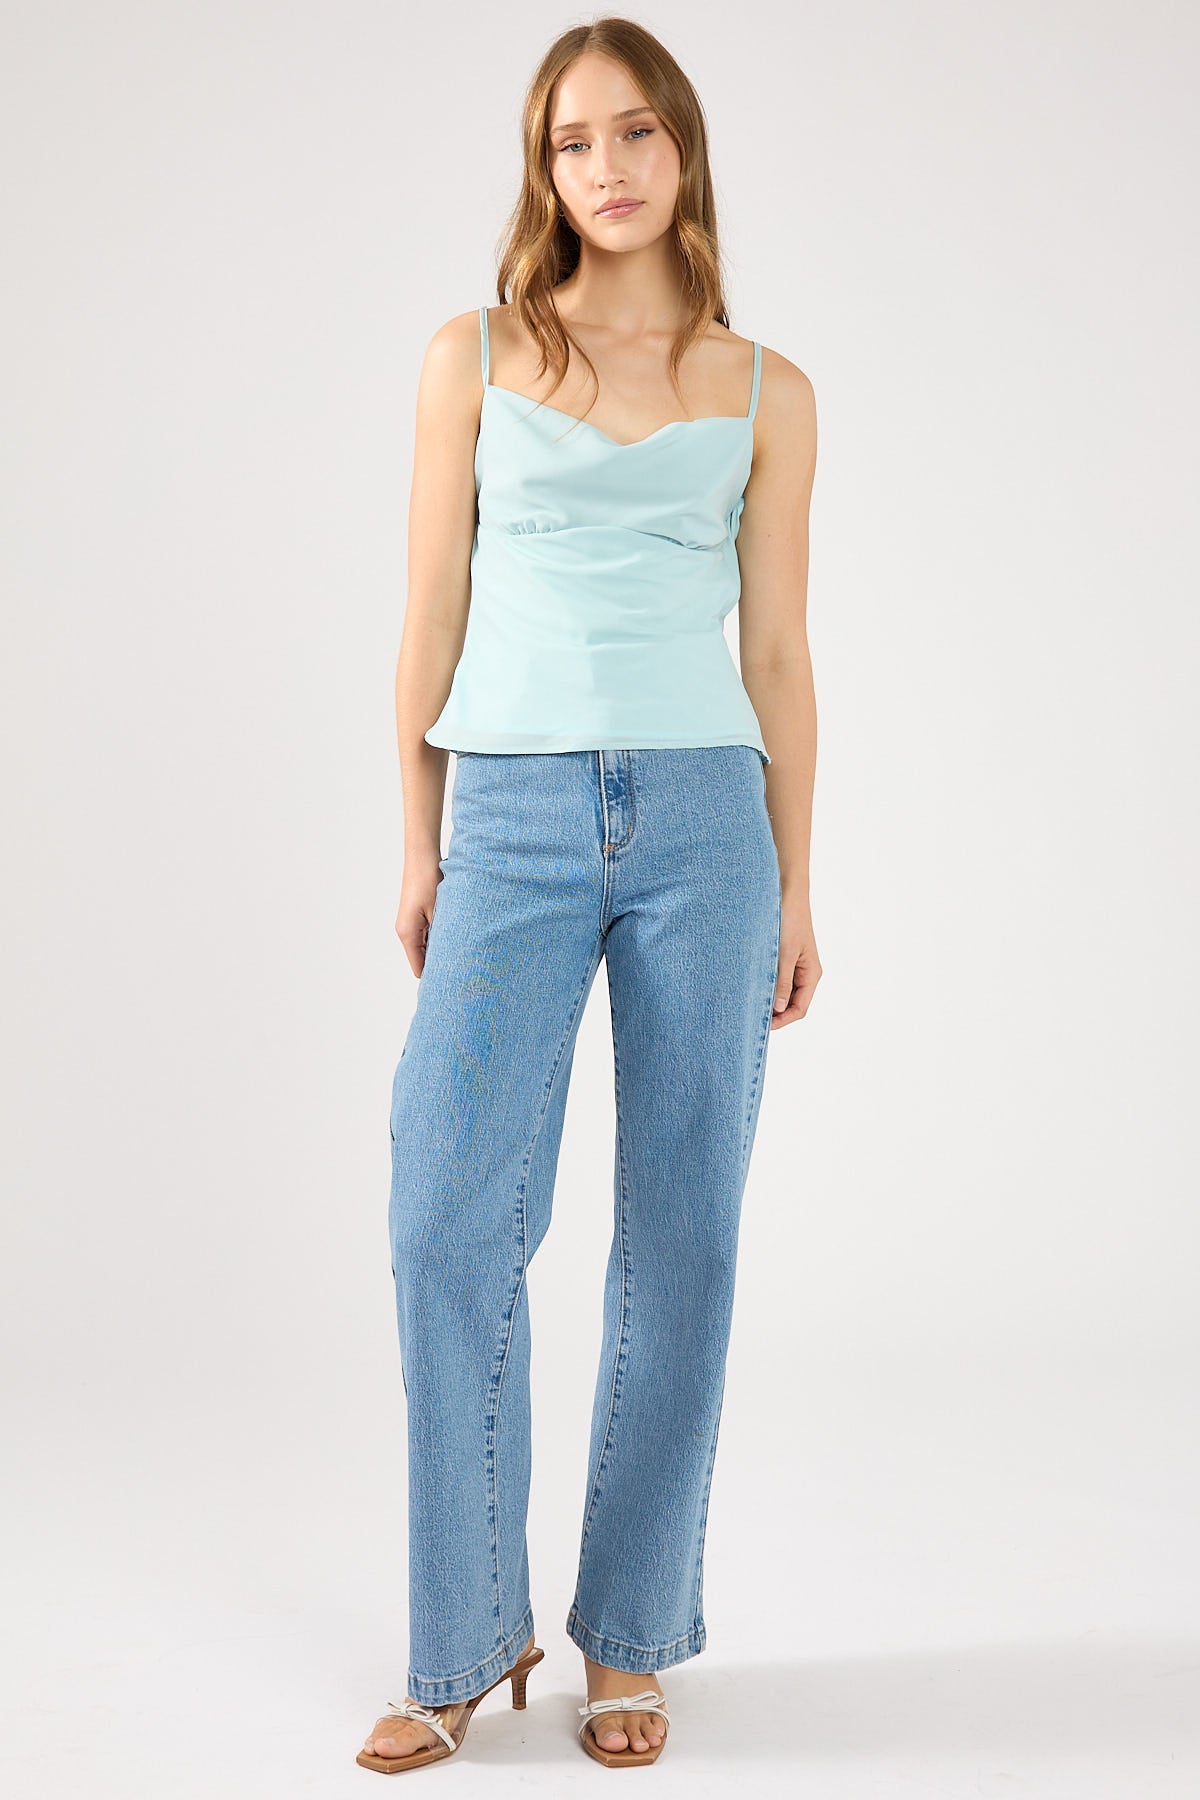 Perfect Stranger Soft Light Recycled Cami Top Blue